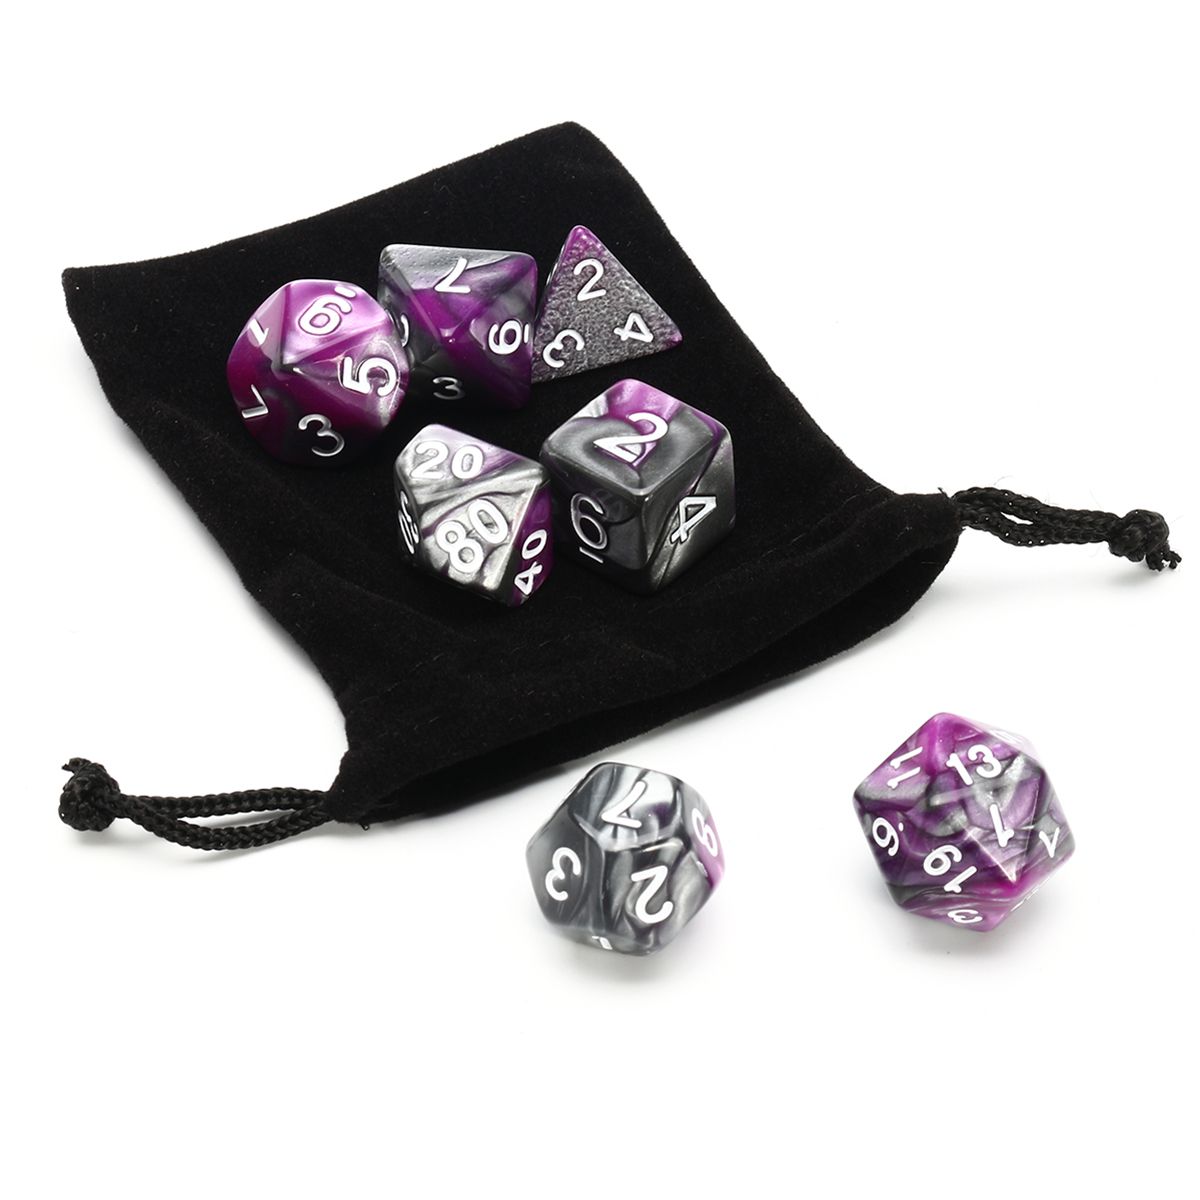 7Pcs-Purple-Gemini-Acrylic-Polyhedral-Dice-For-Dungeons-Dragons-RPG-RPG-With-Bag-1303425